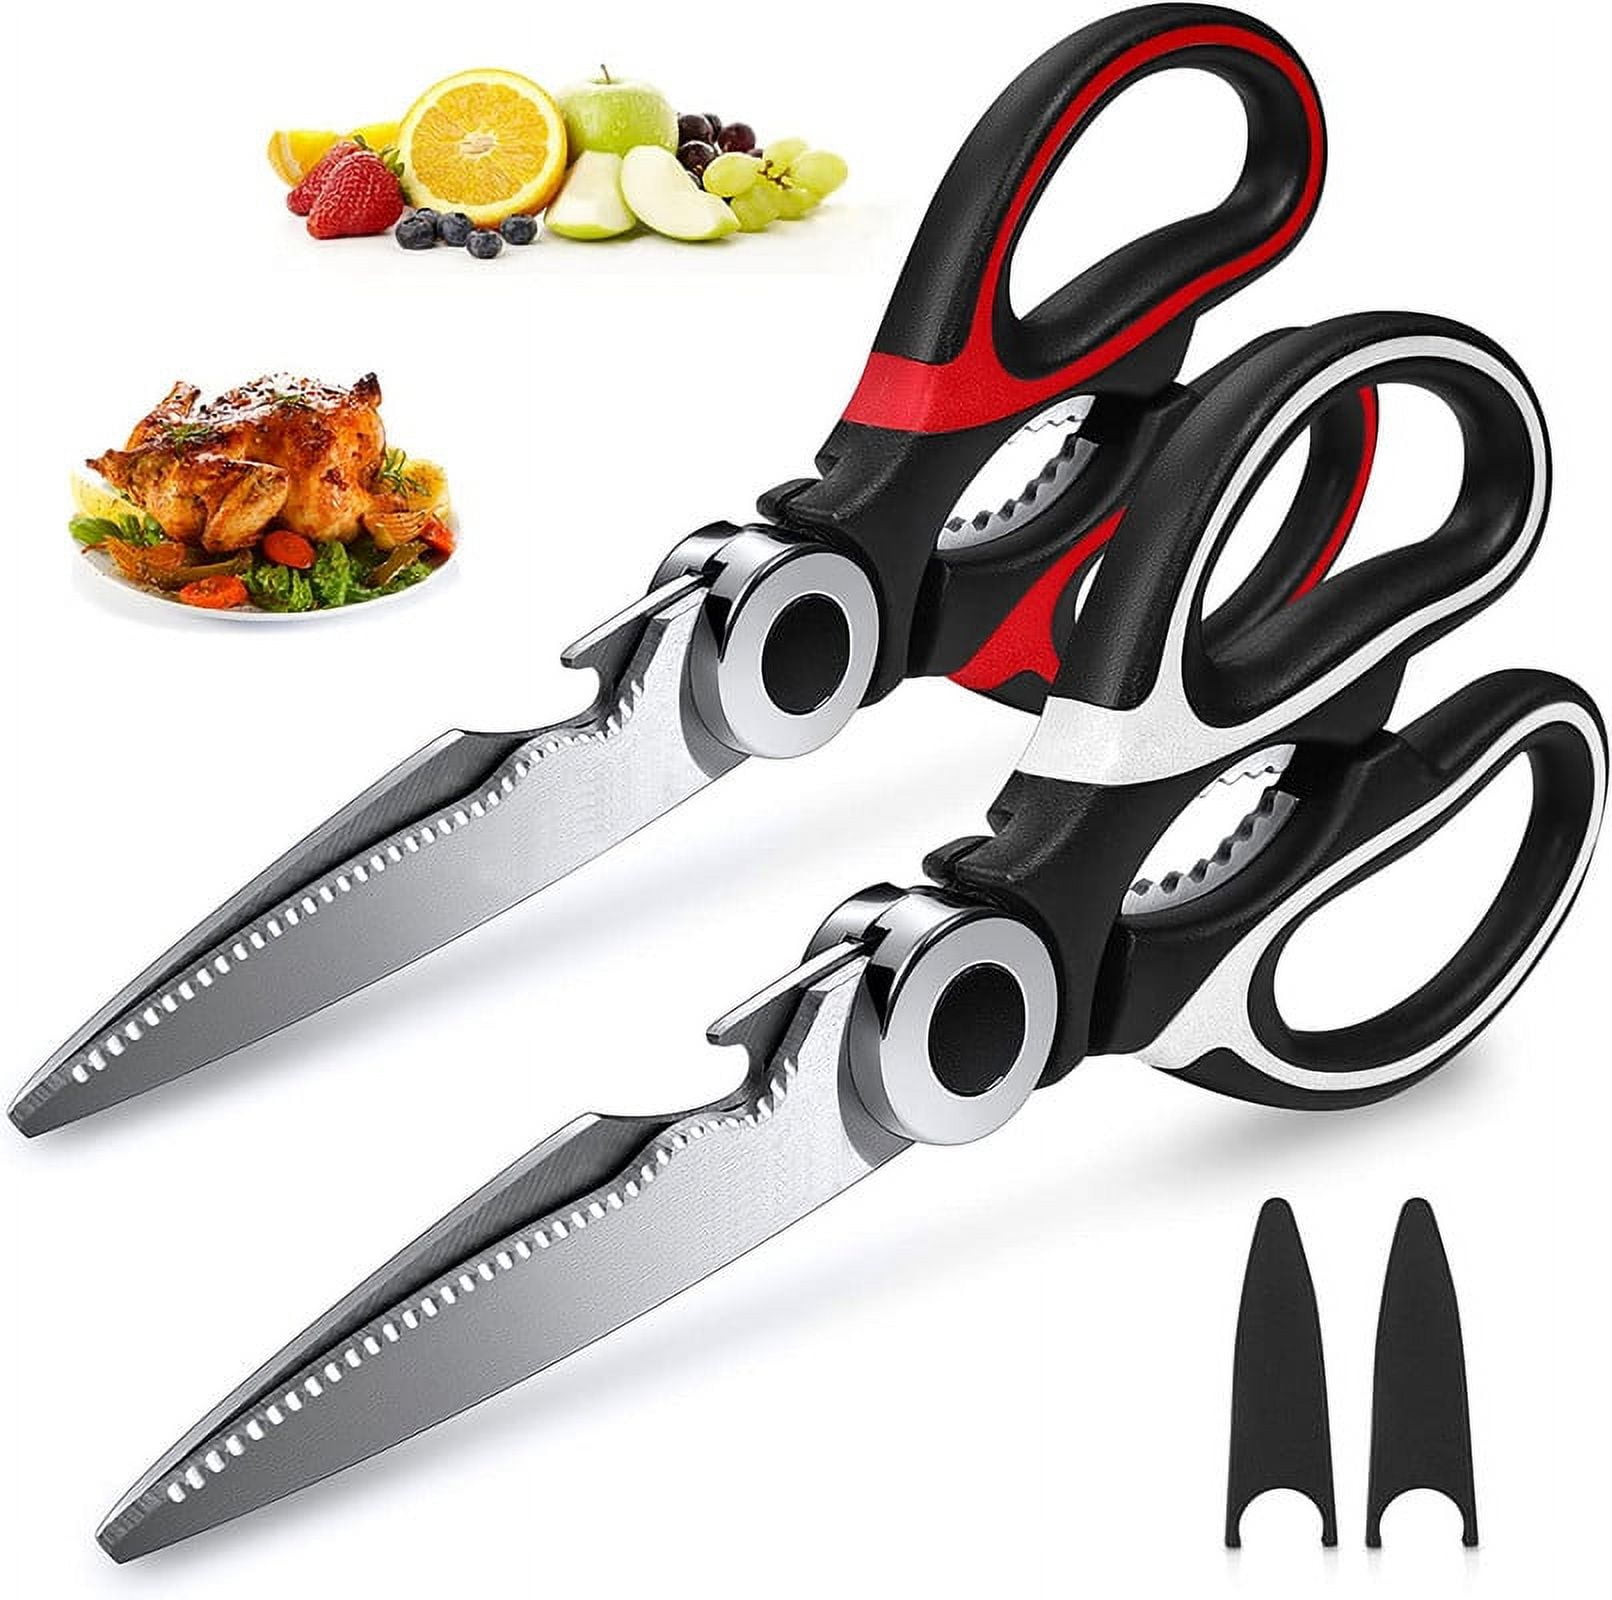 Kitchen Scissor for General Use 2-Packs,Heavy Duty Kitchen Raptor Meat Shears,Dishwasher Safe Cooking Scissors, Stainless Steel Multi-function